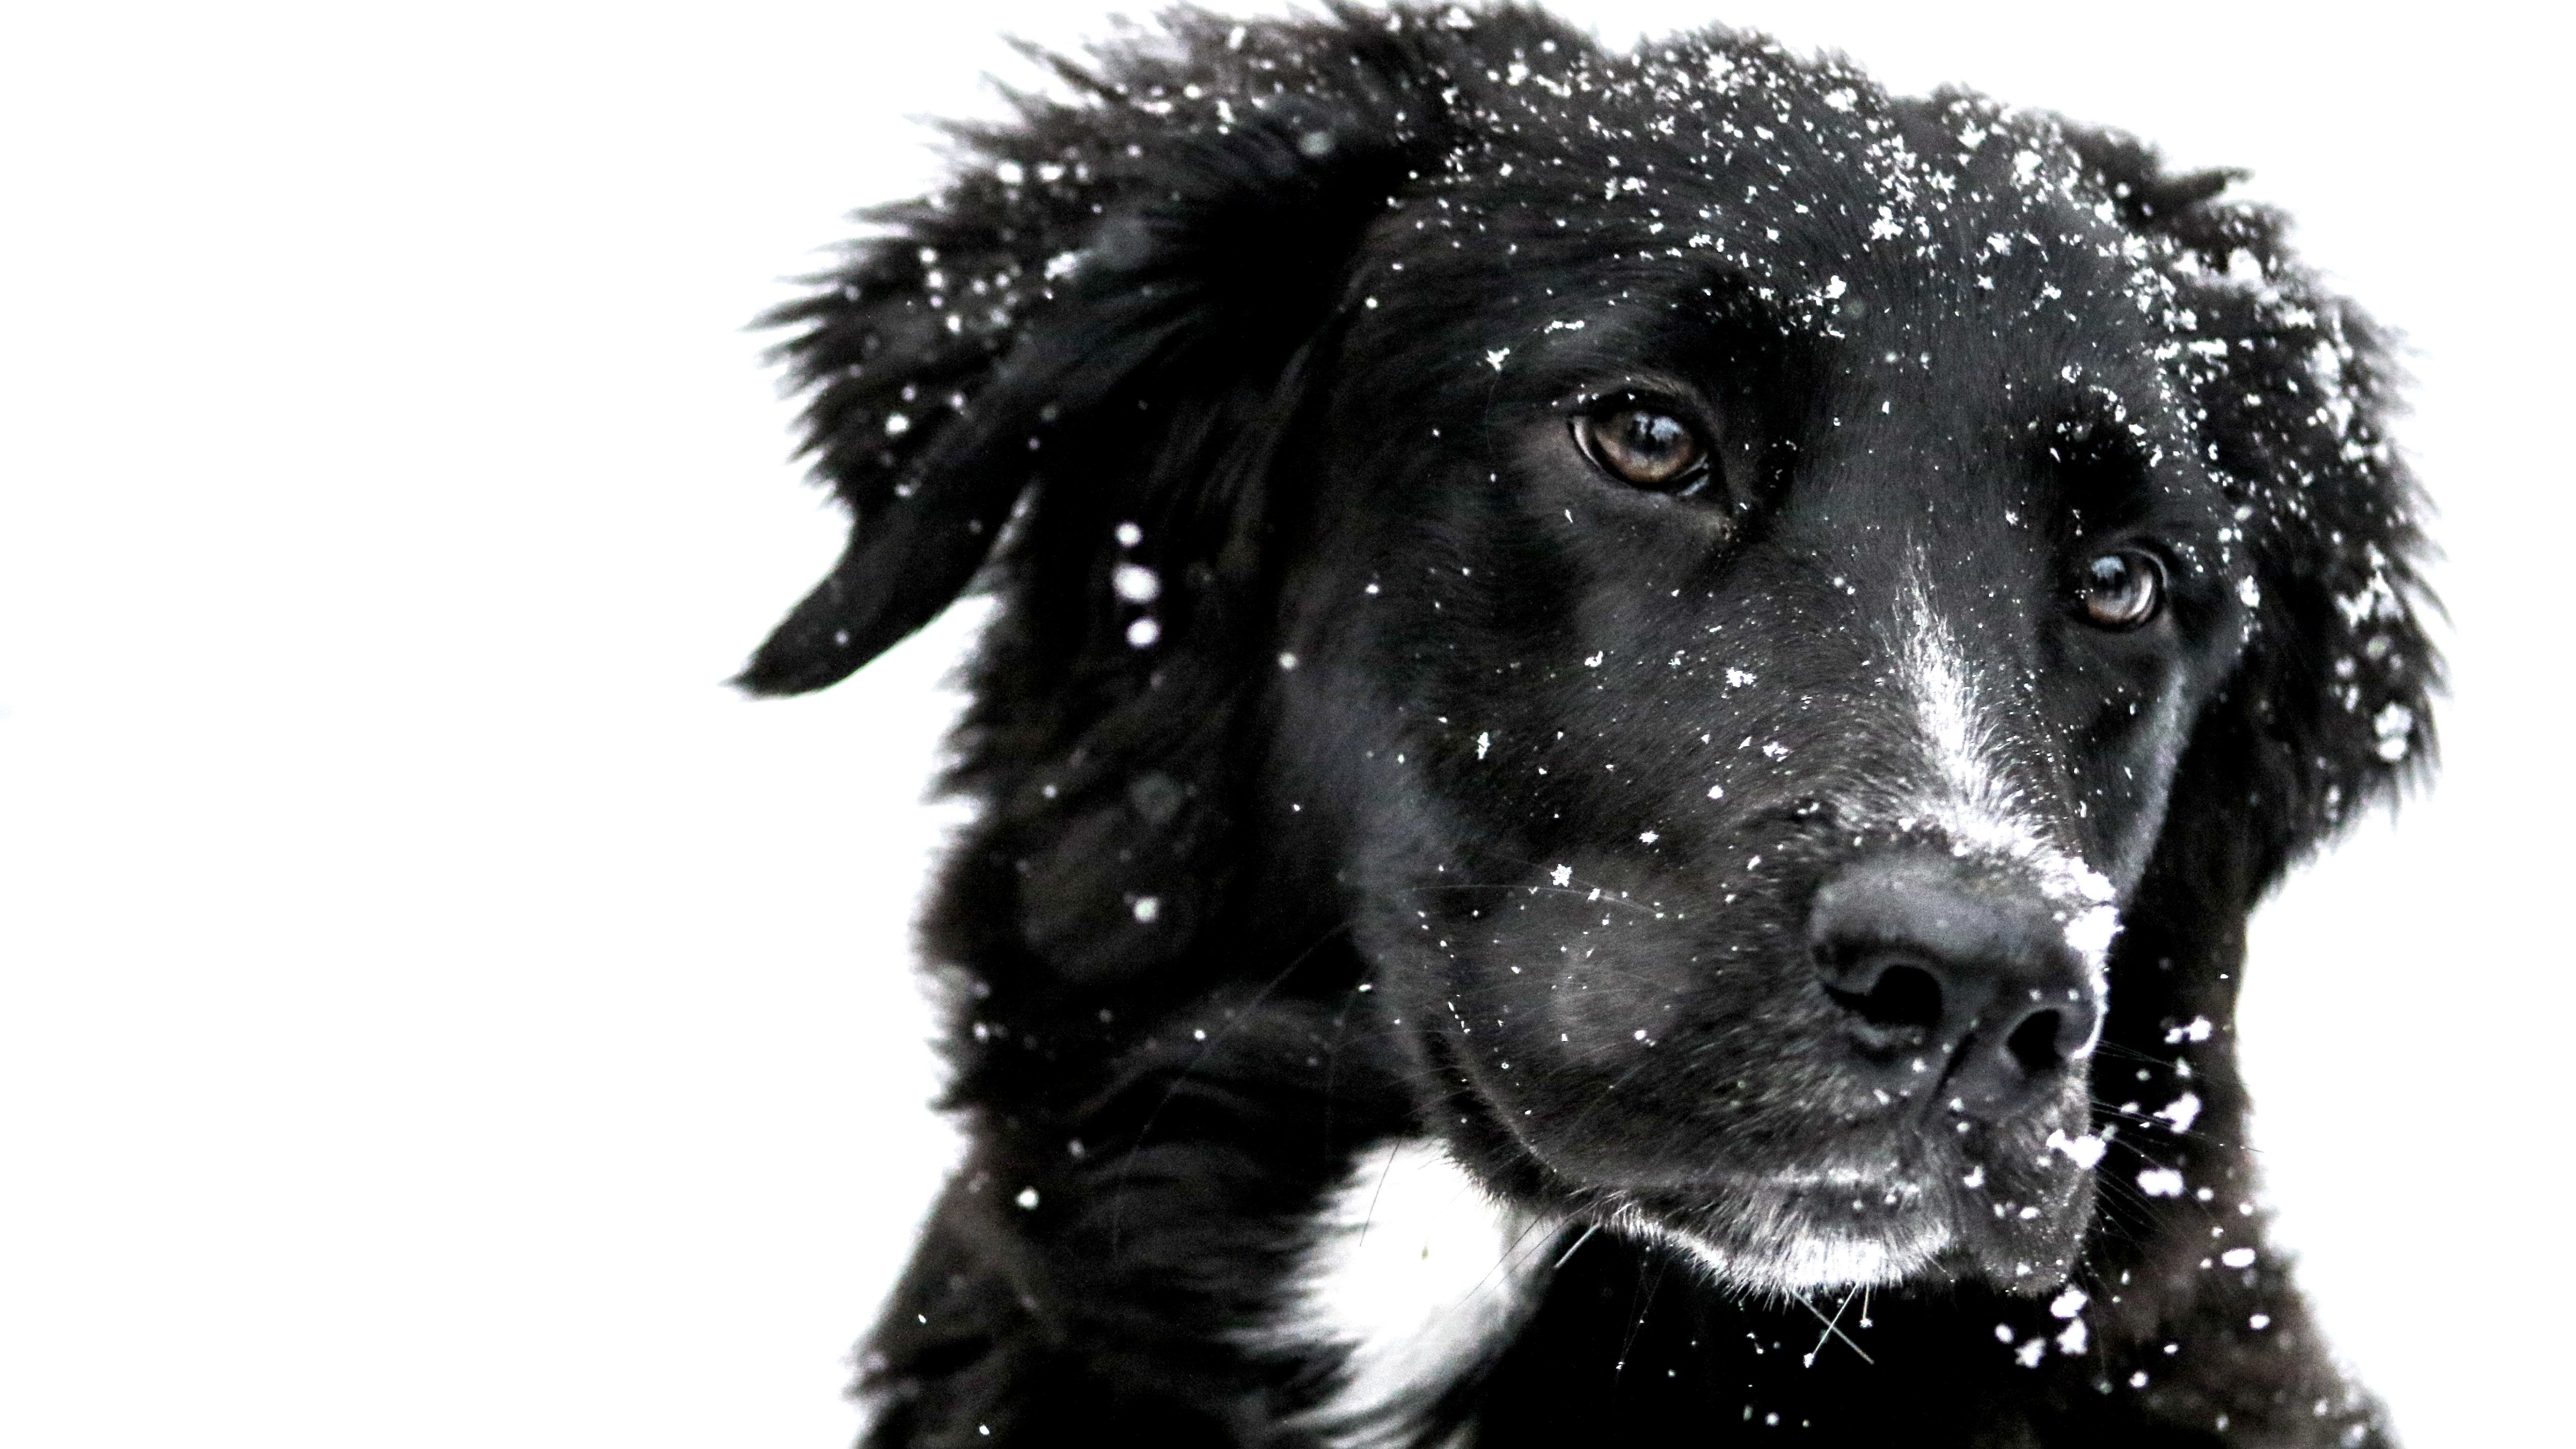 Snowing over the cute dog wallpaper 5120x2880